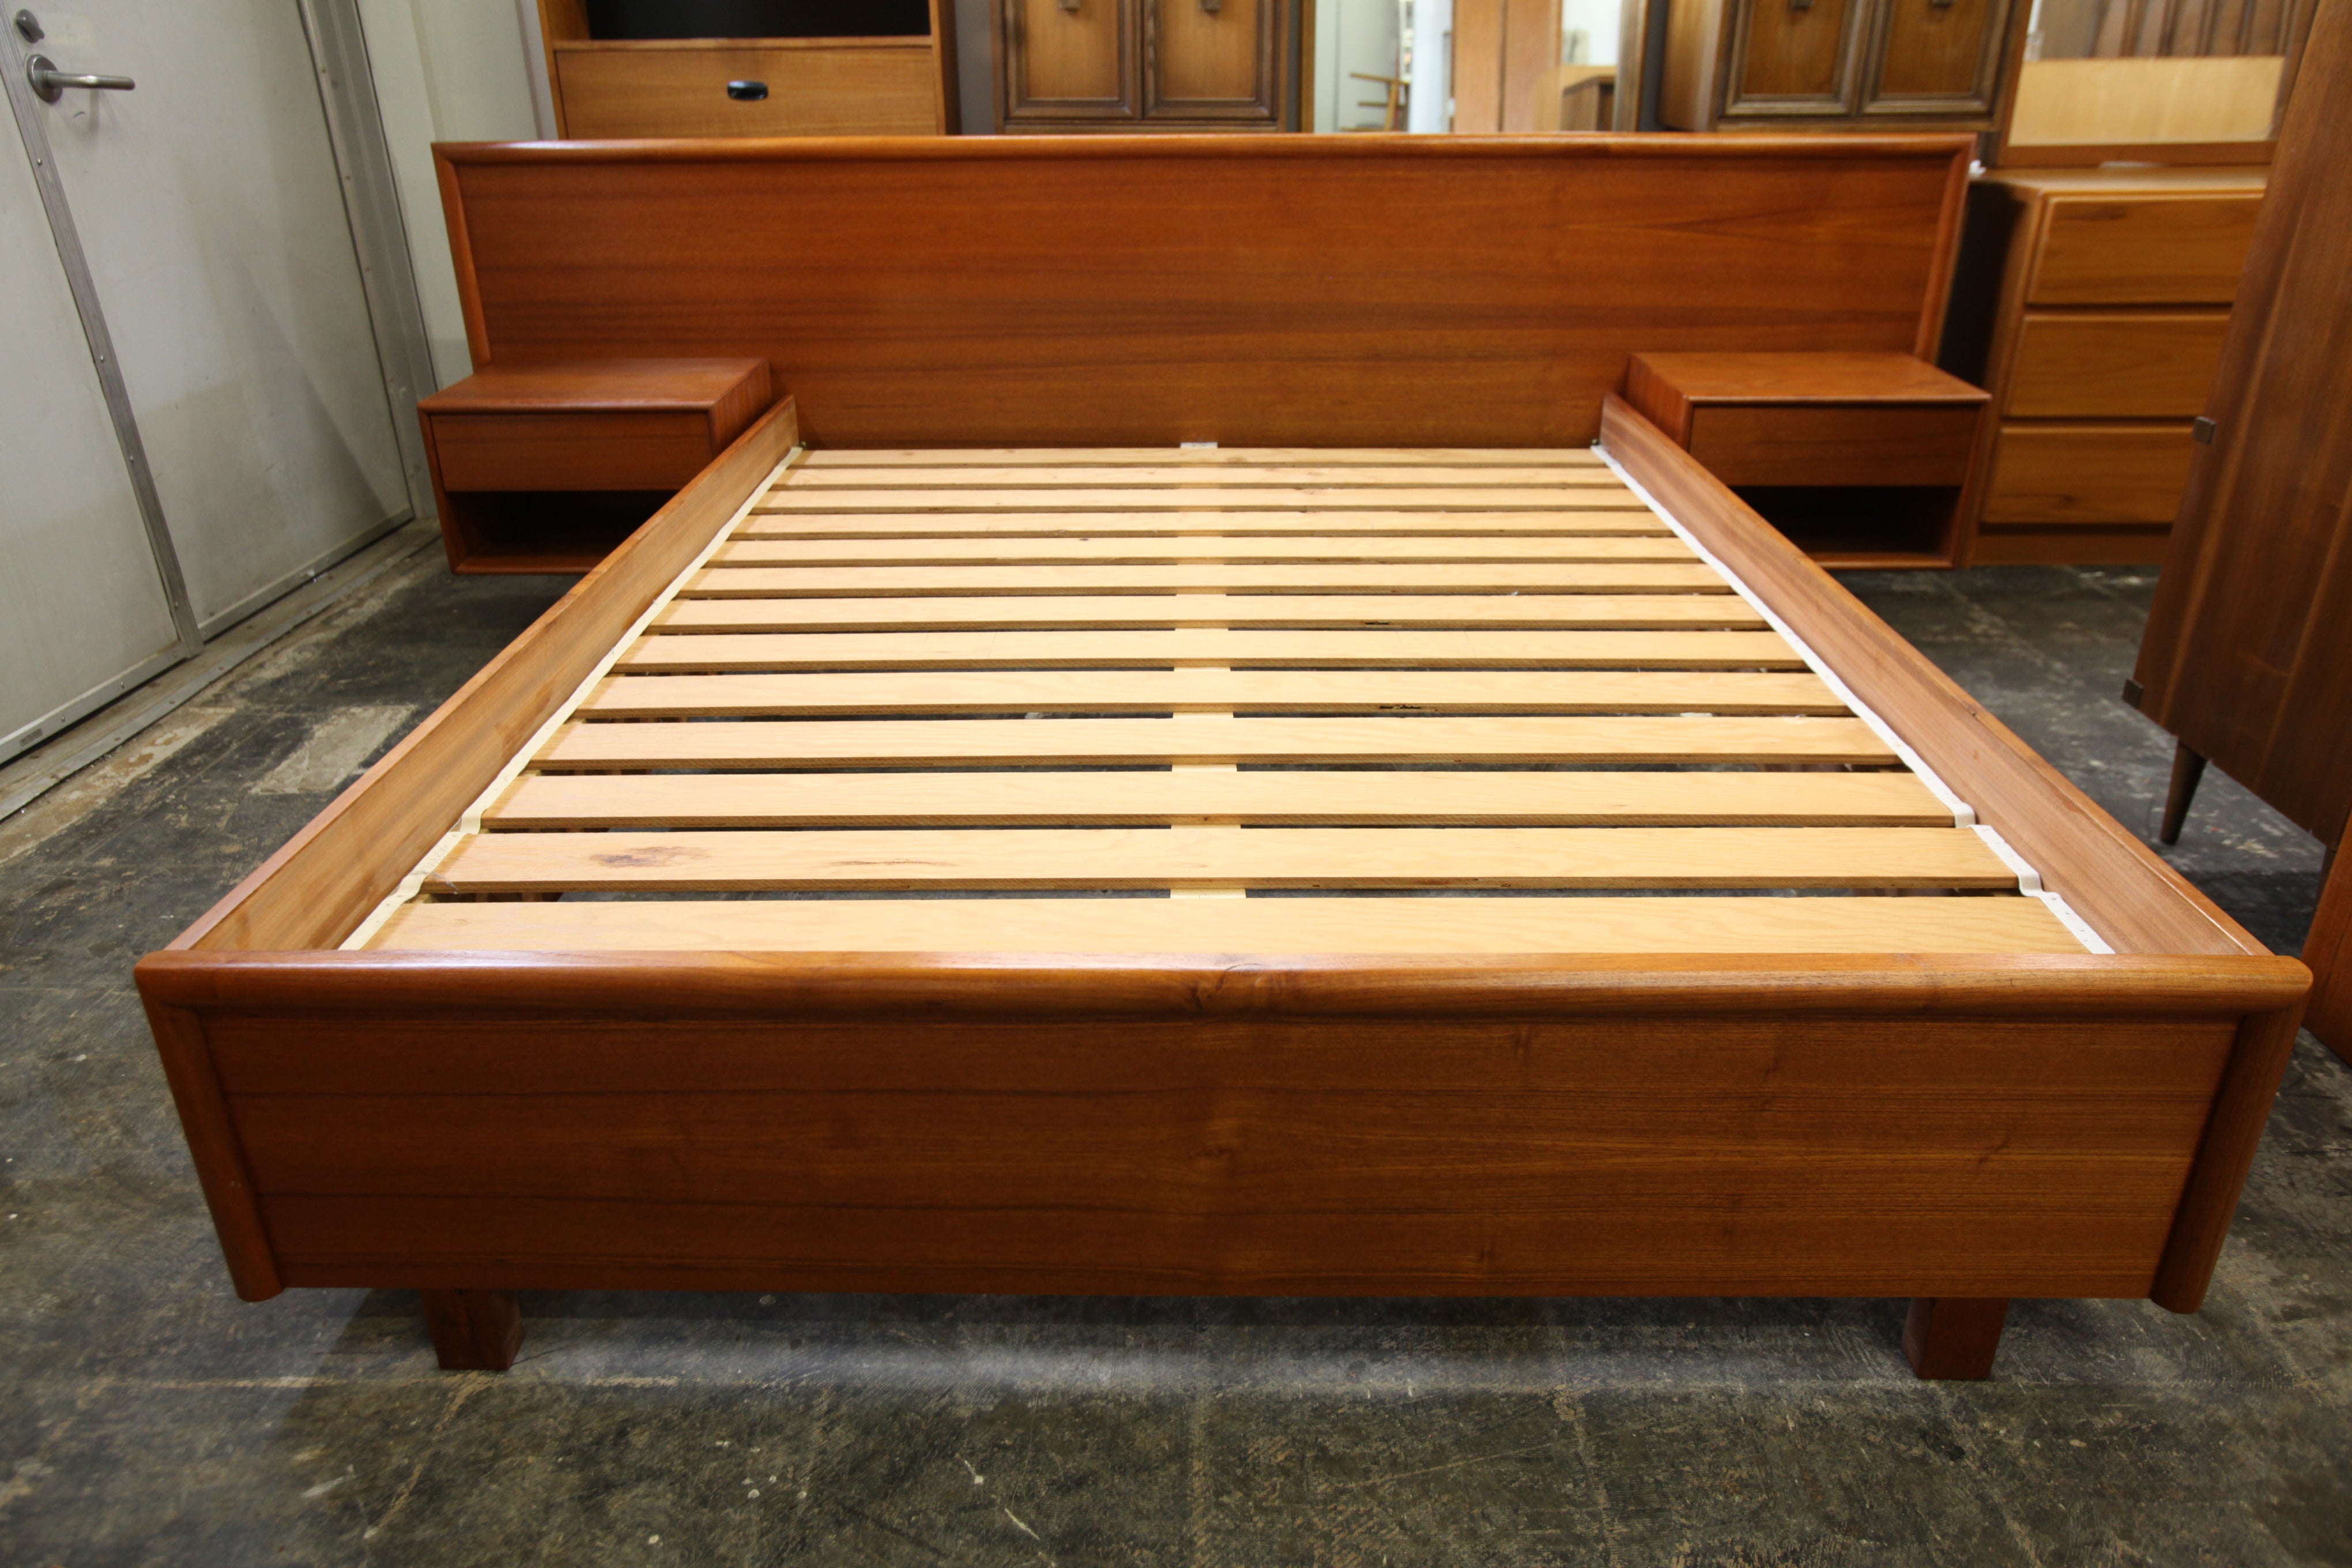 Beautiful Vintage Teak Queen Bed w/ Floating Night Stands (108.5"W x 33.75"H x 82.5"D)